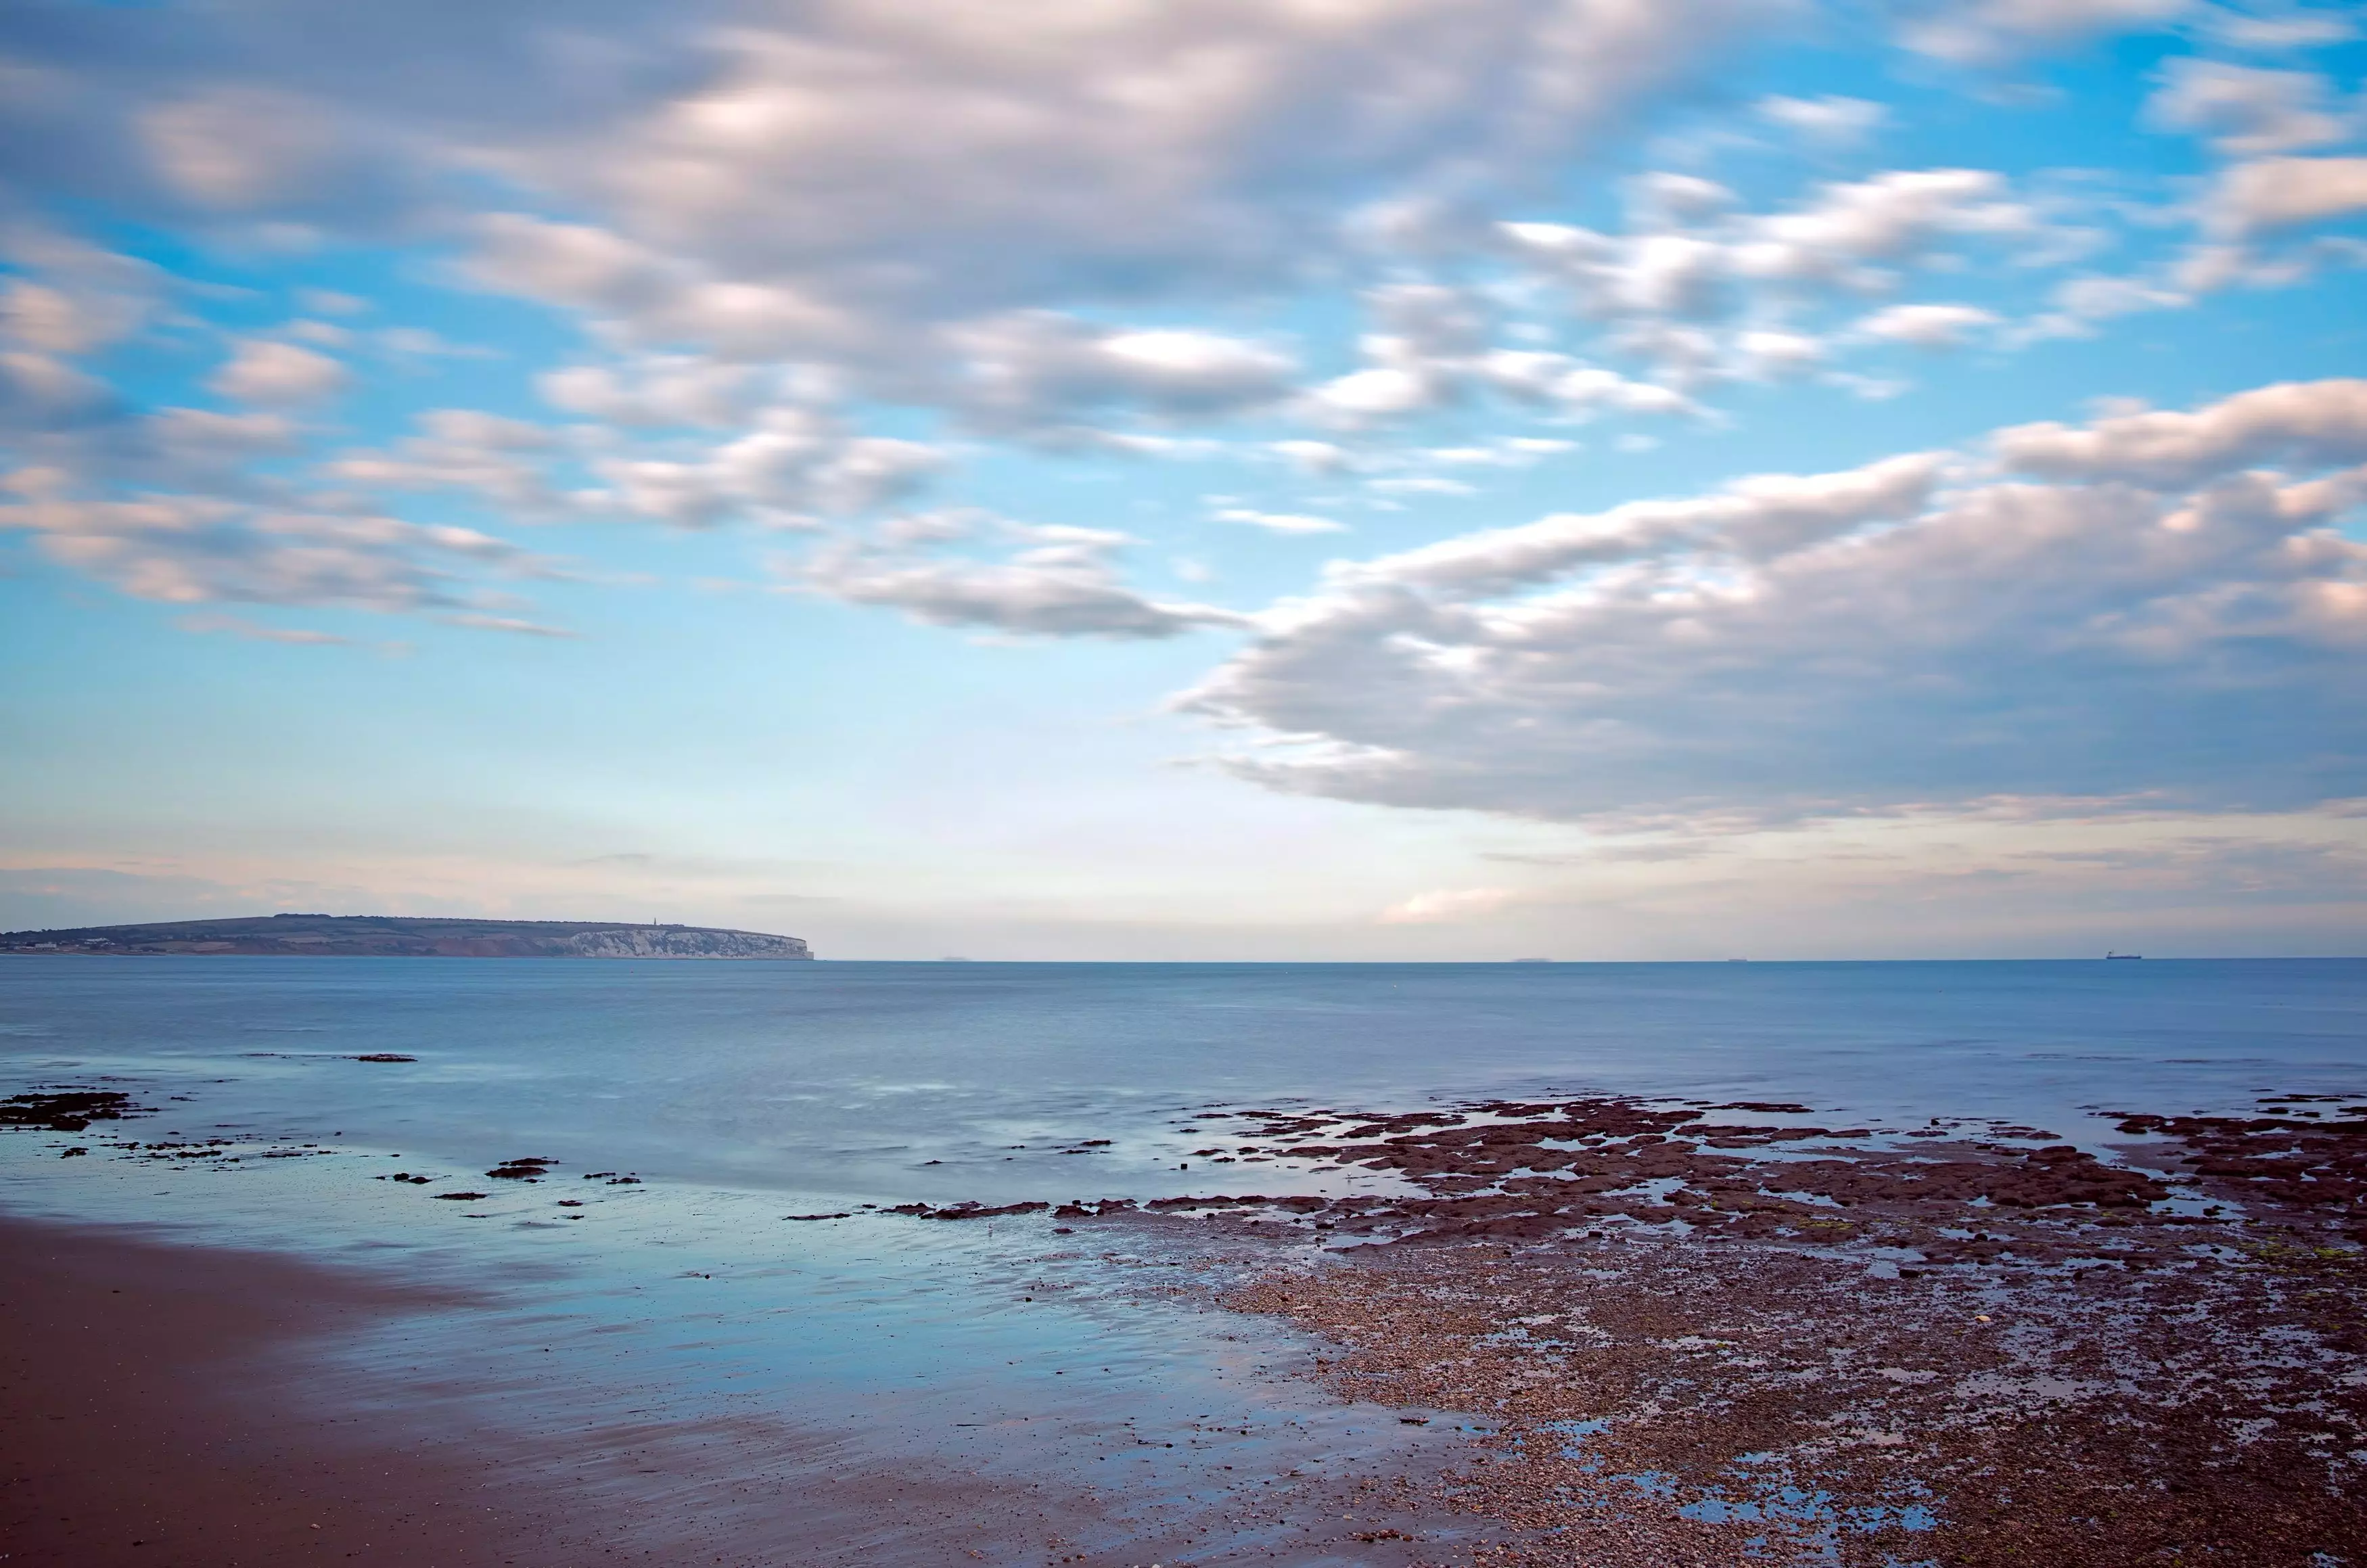 Sandown Bay, where the fossil was discovered.